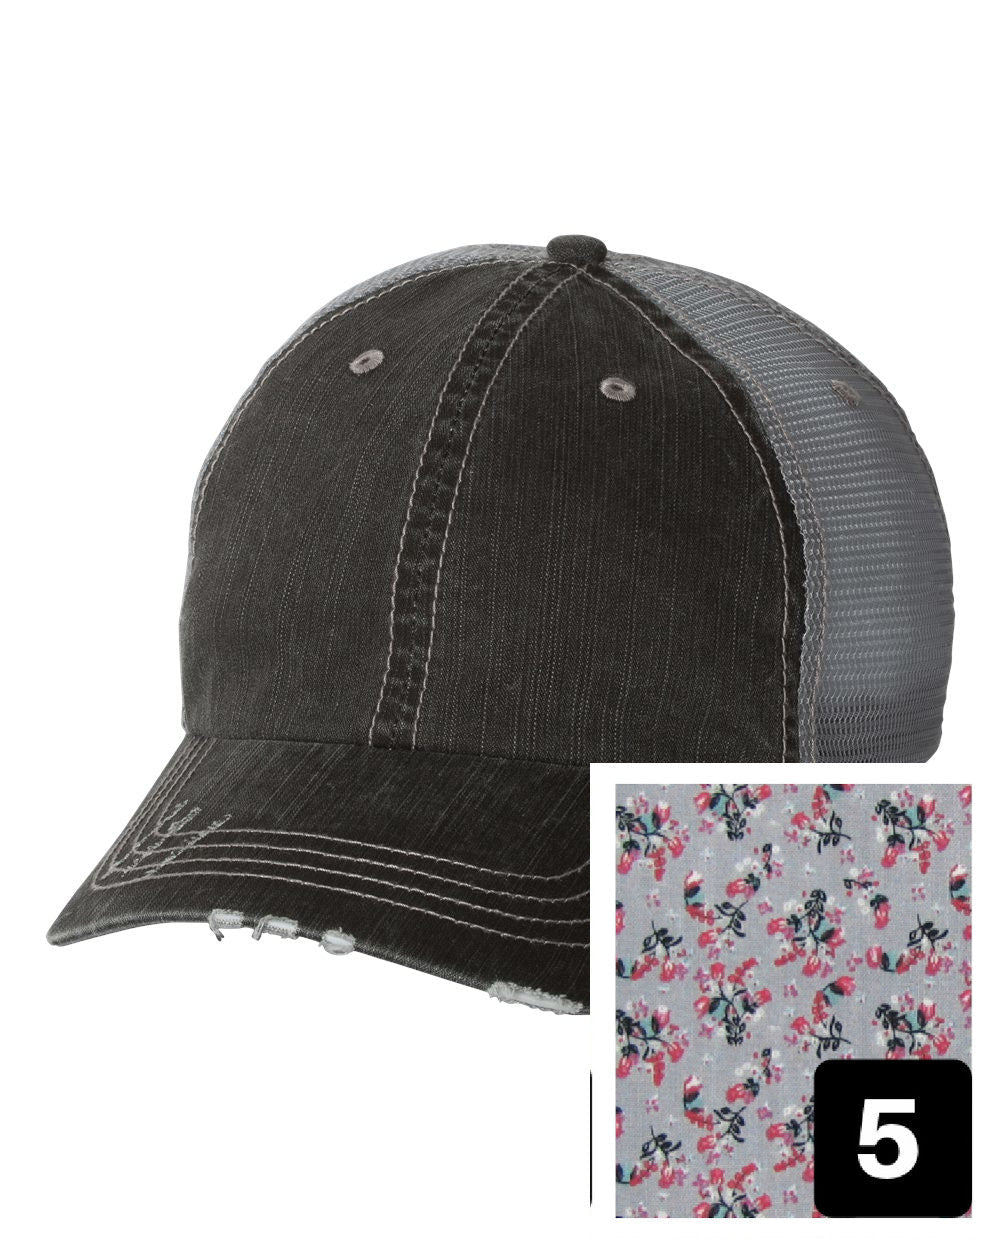 gray distressed trucker hat with purple and pink floral fabric state of Montana